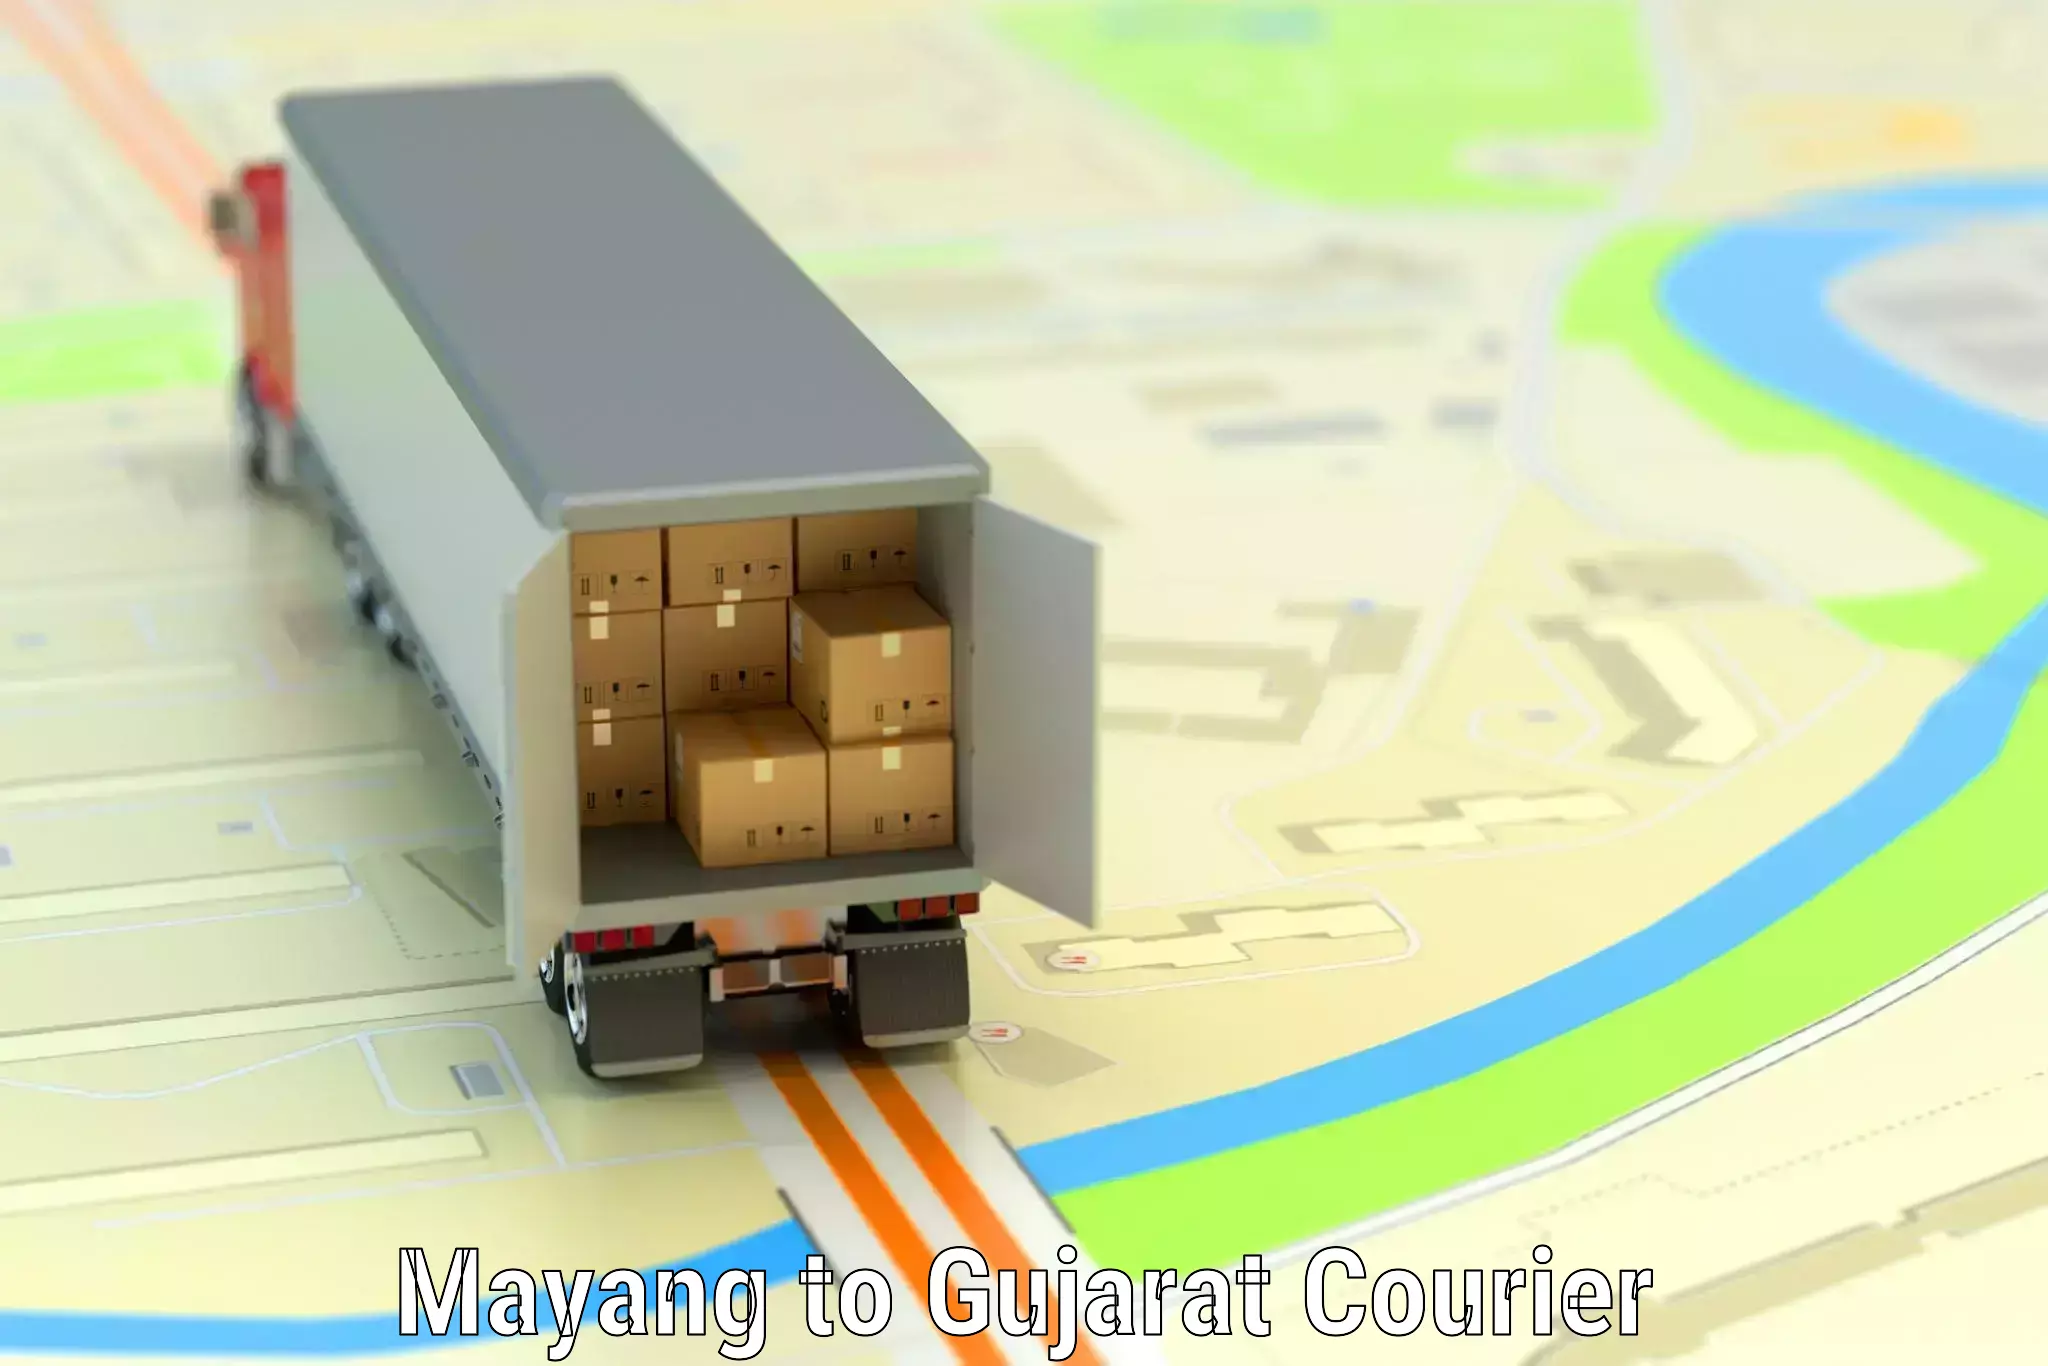 Luggage transport consultancy Mayang to Gujarat